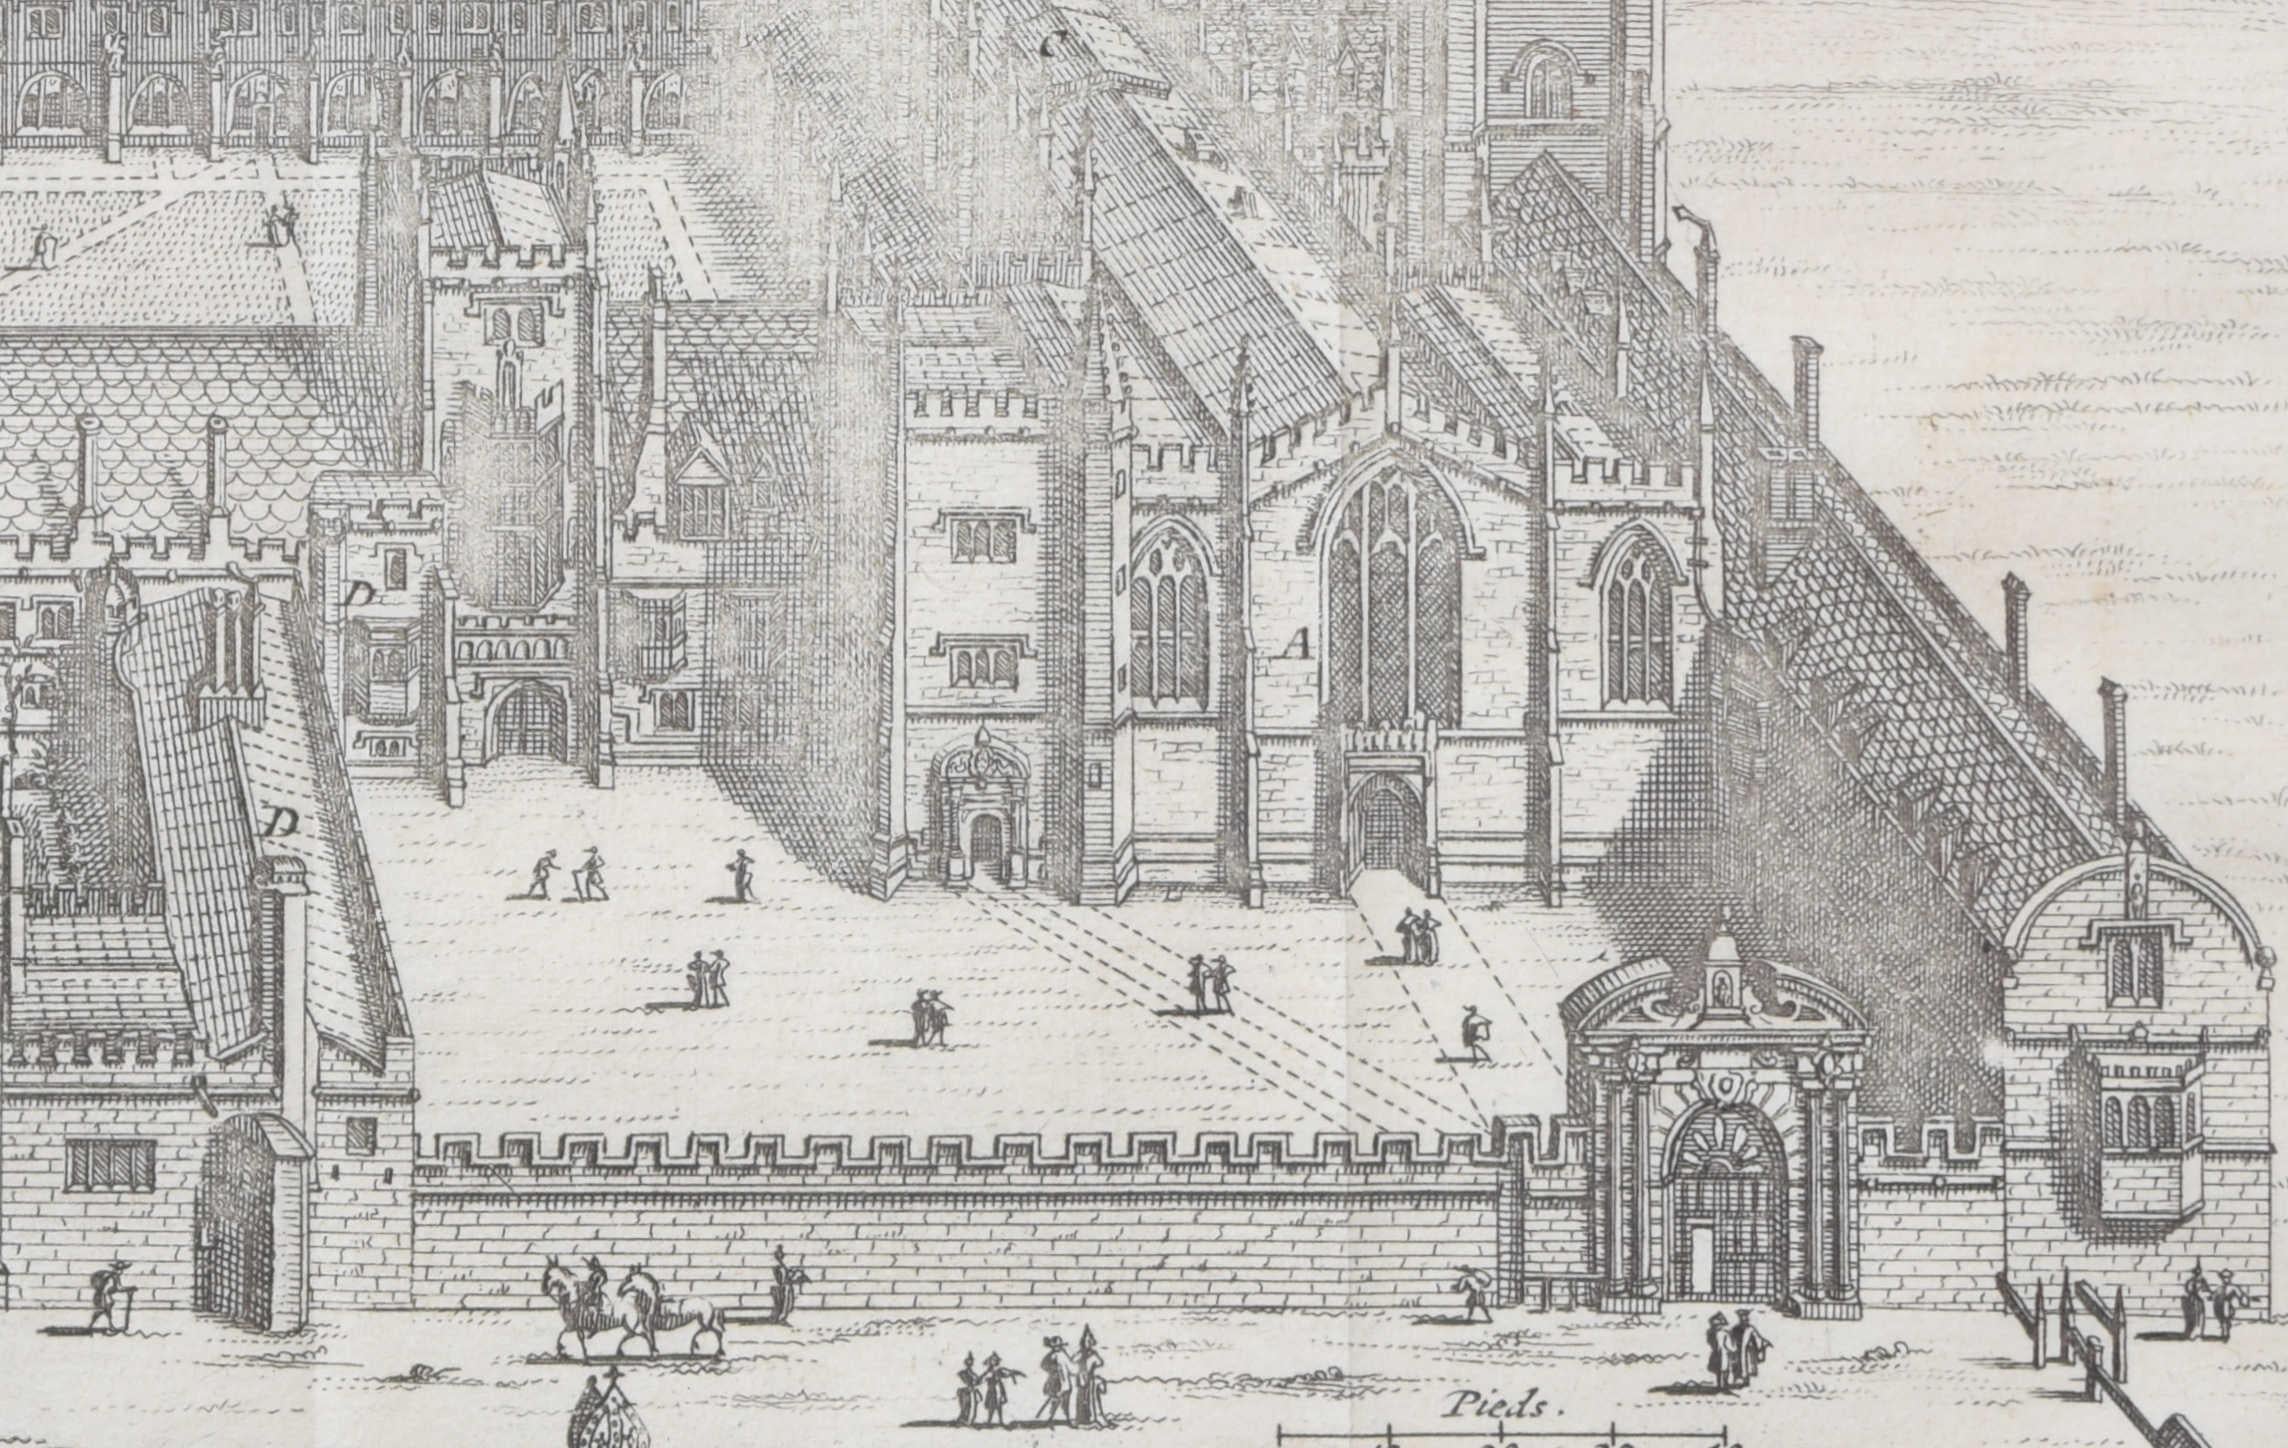 Pieter van der Aa (1659-1733), after David Loggan (1634–1692)
Magdalen College, Oxford
Engraving
12 x 16 cm

A magnificent eighteenth-century view of Magdalen, engraved by Pieter van der Aa after David Loggan, the noted engraver, draughtsman, and